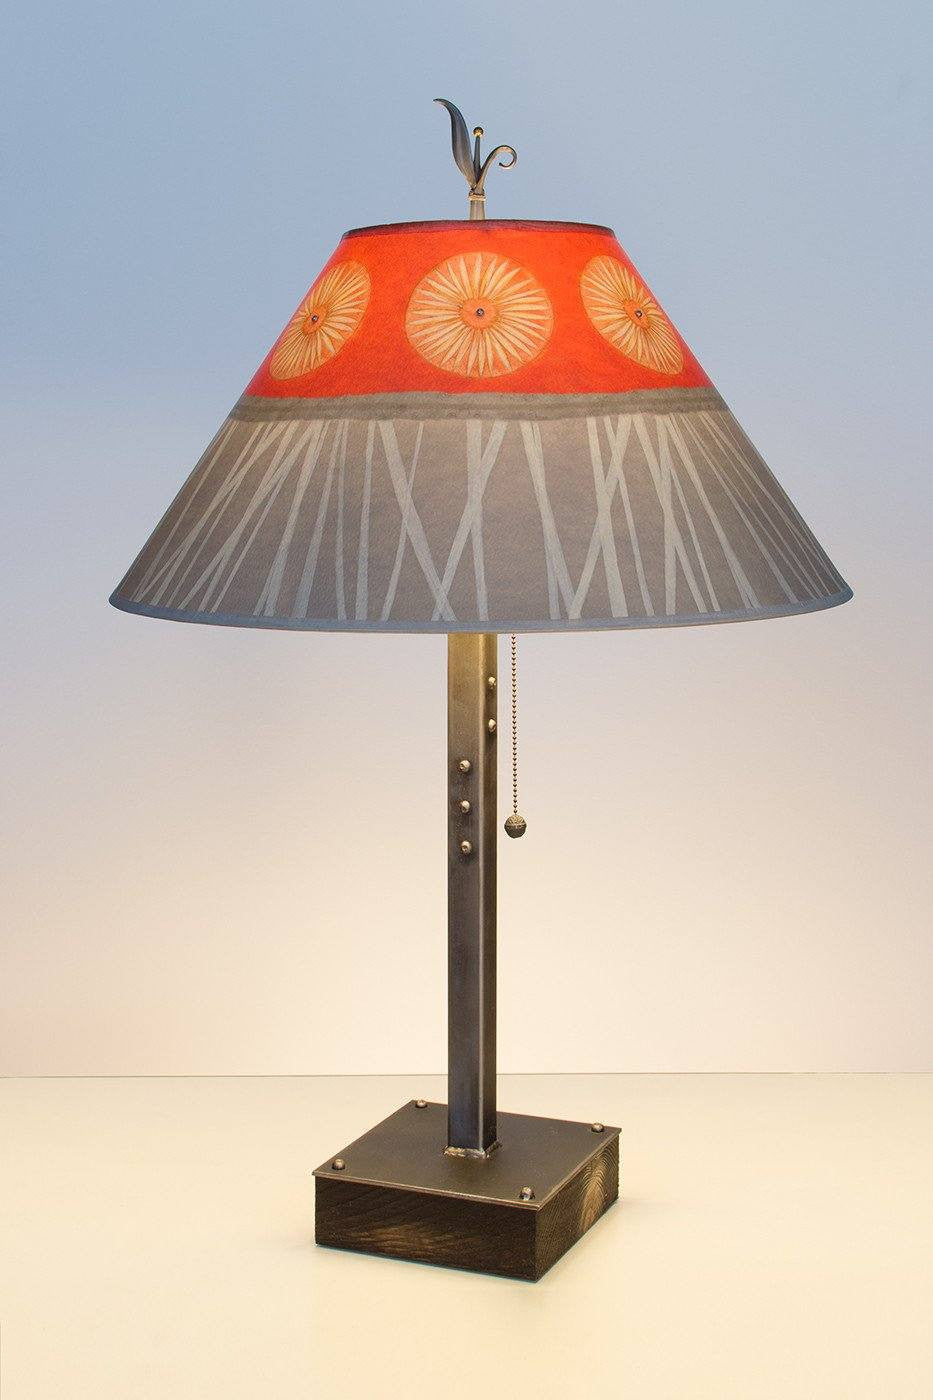 Steel Table Lamp on Wood with Large Conical Shade in Tang